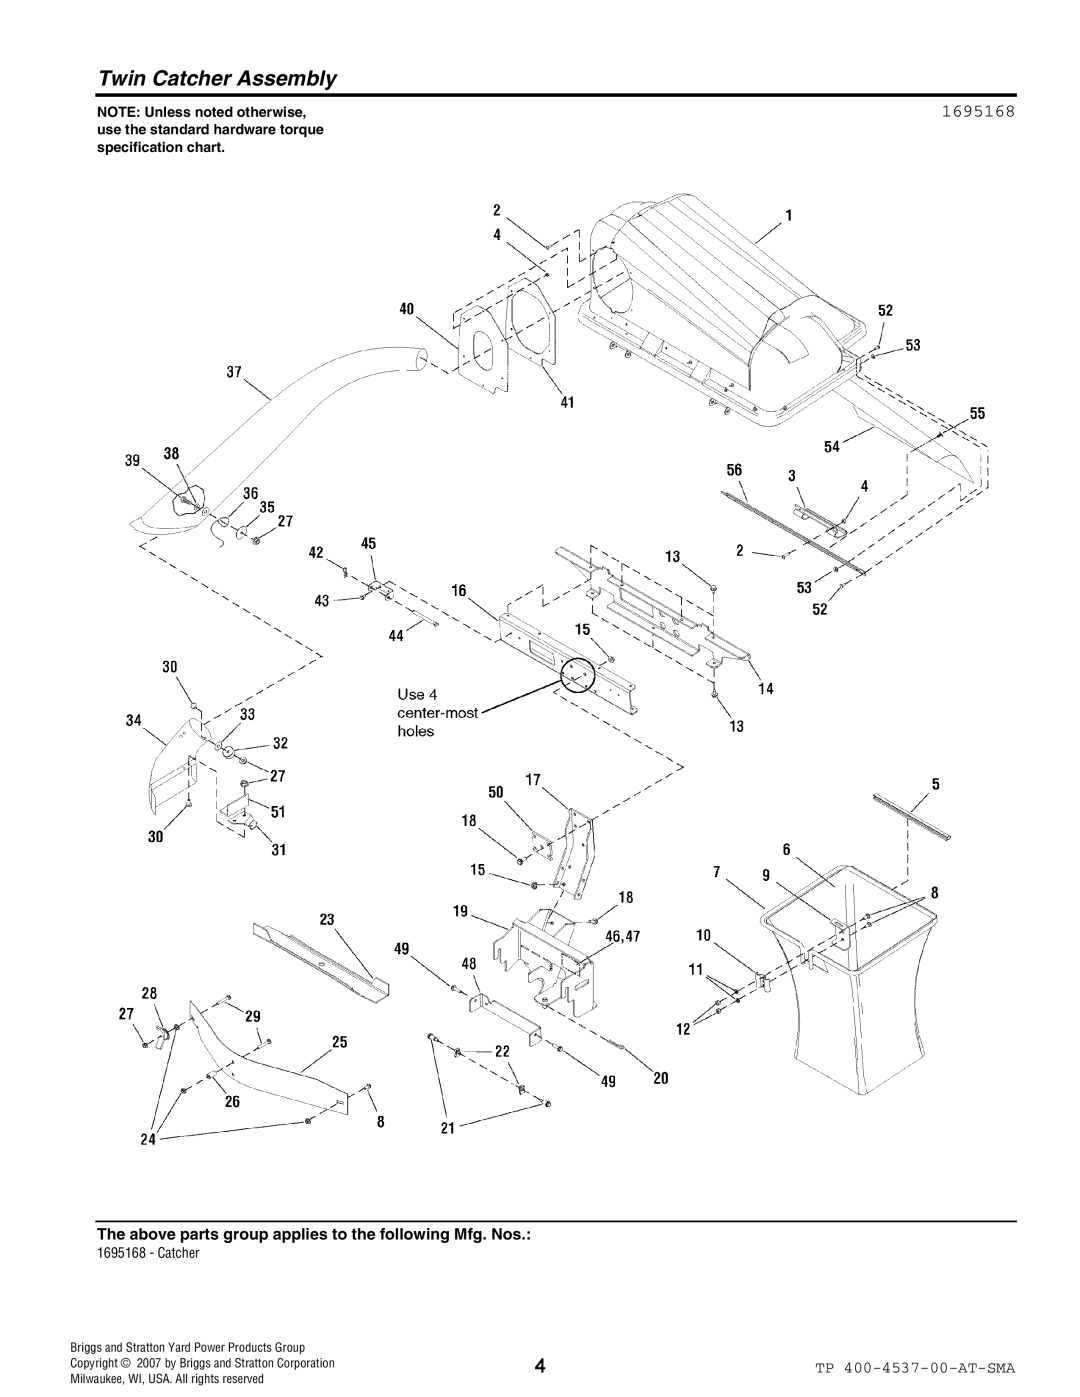 Simplicity 1695168 manual Twin Catcher Assembly, NOTE Unless noted otherwise, Briggs and Stratton Yard Power Products Group 